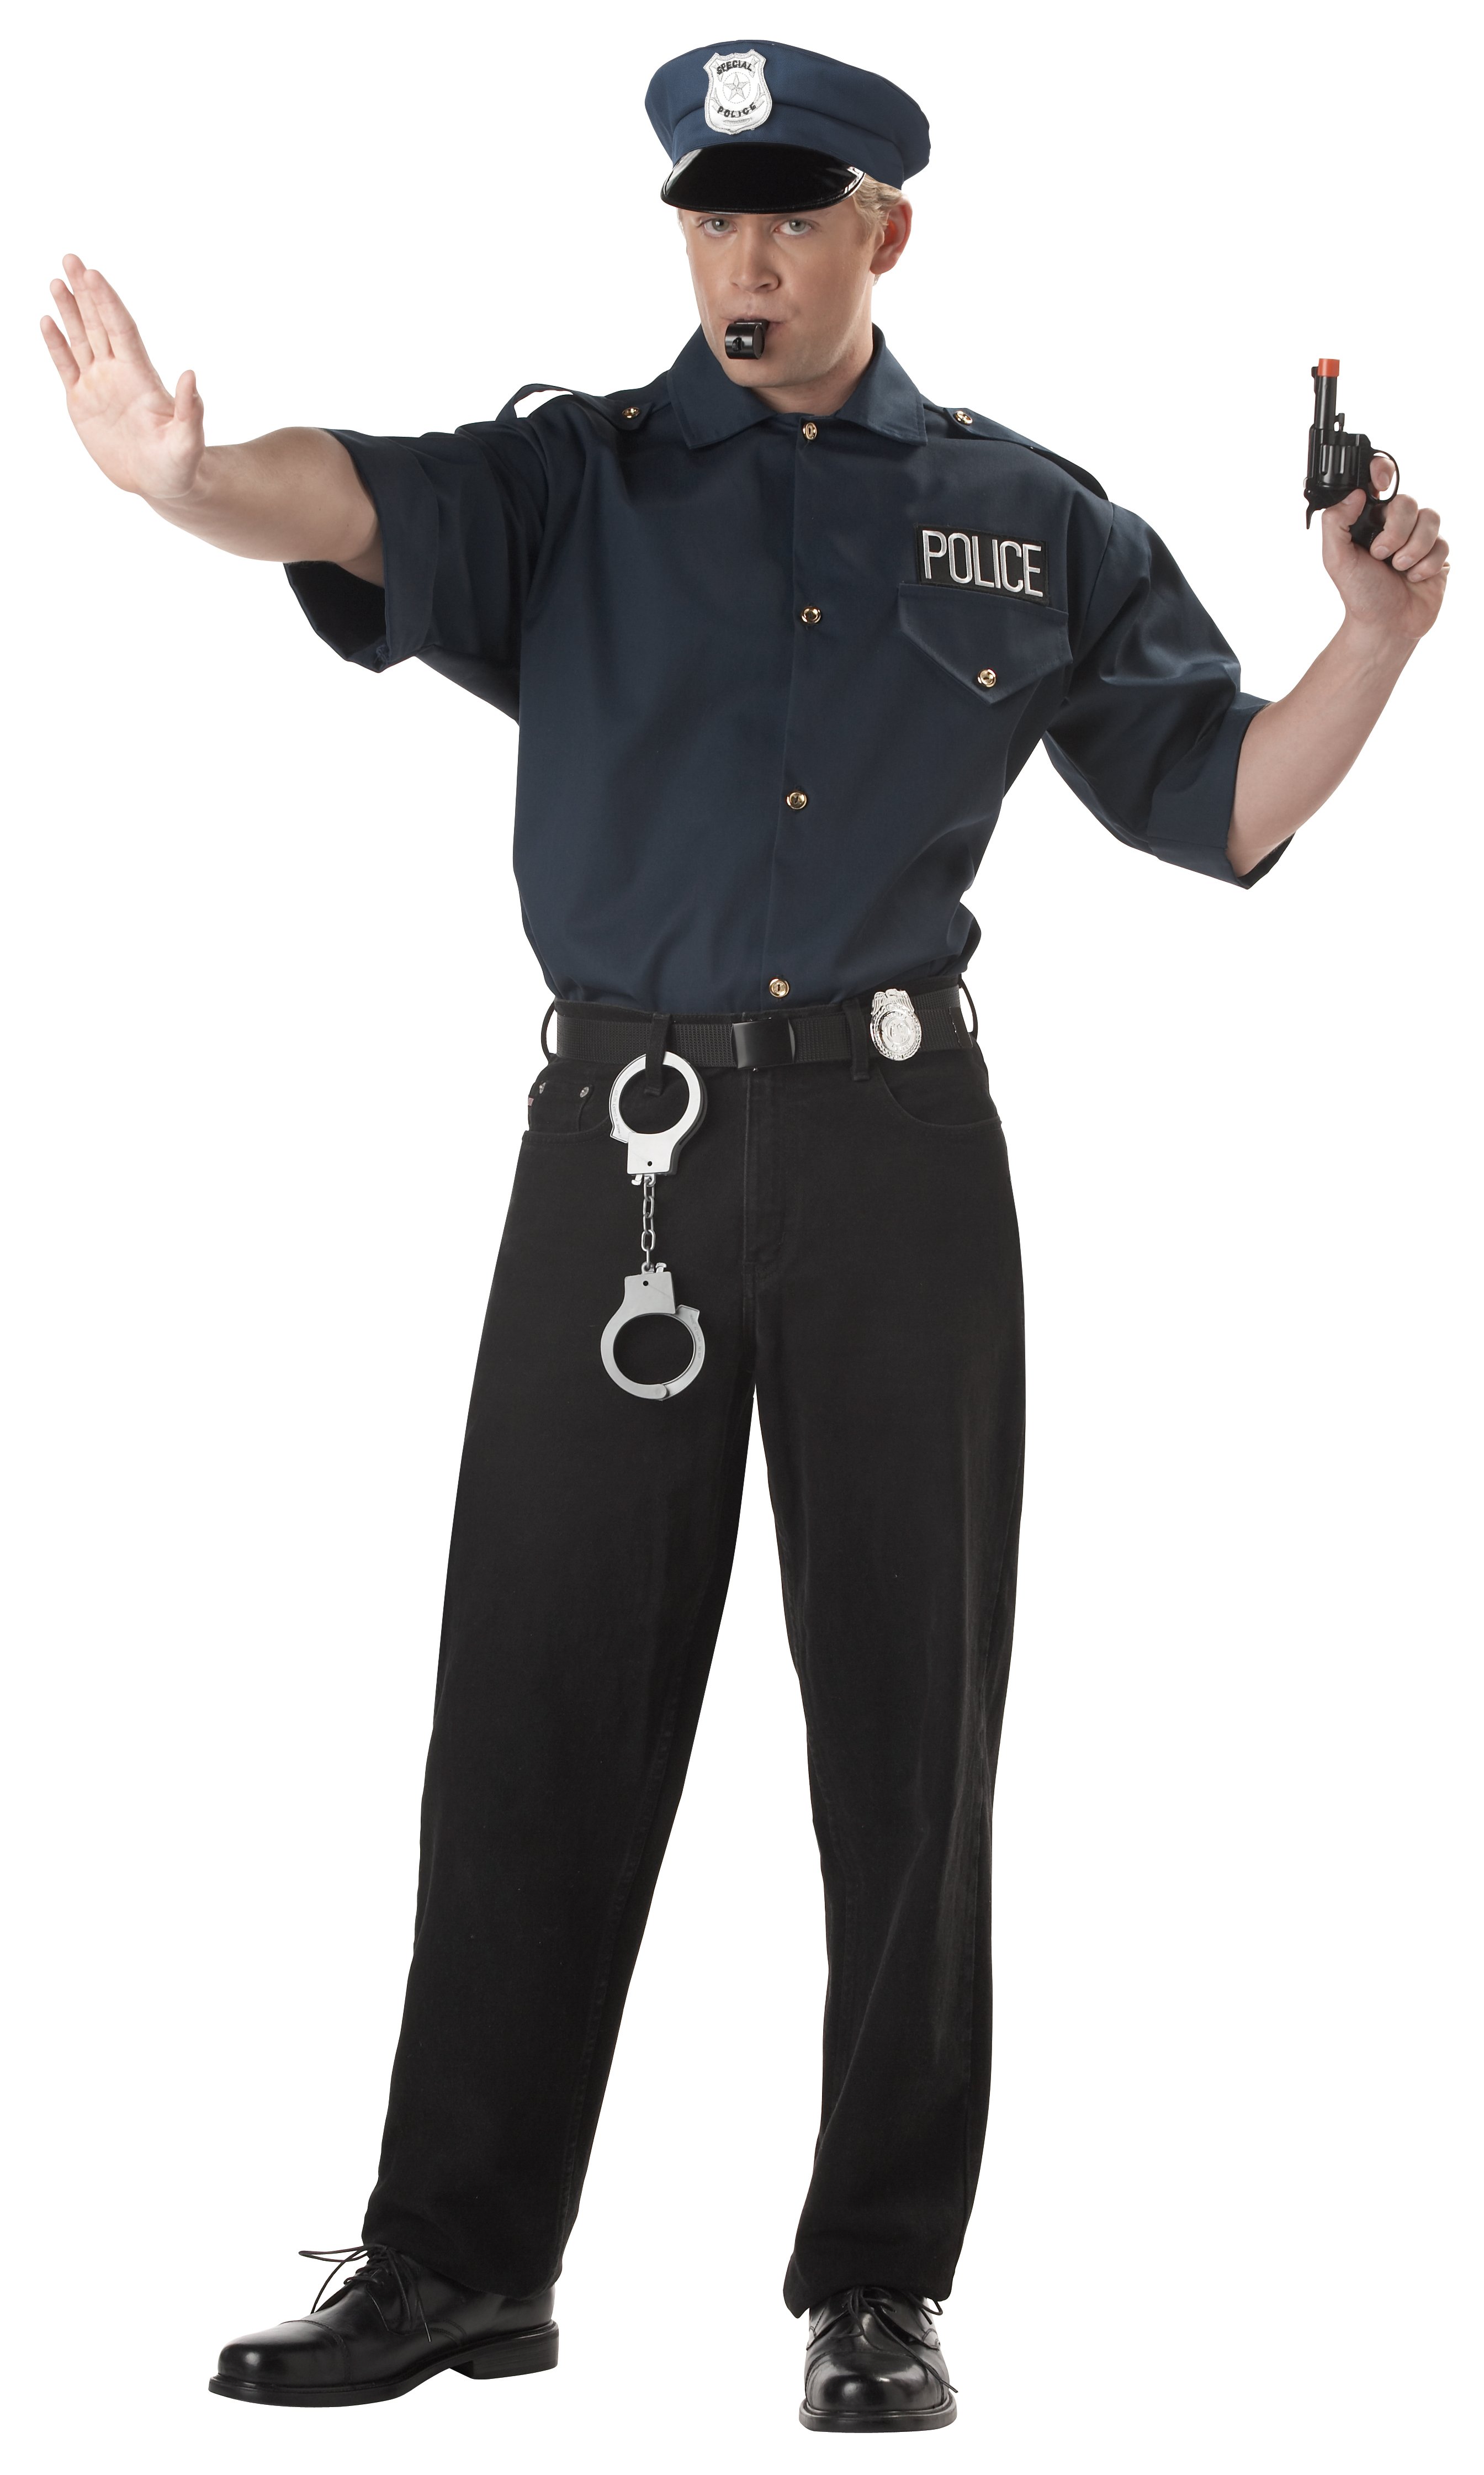 The Cop Adult Costume Kit includes: A dark blue short sleeve button down sh...